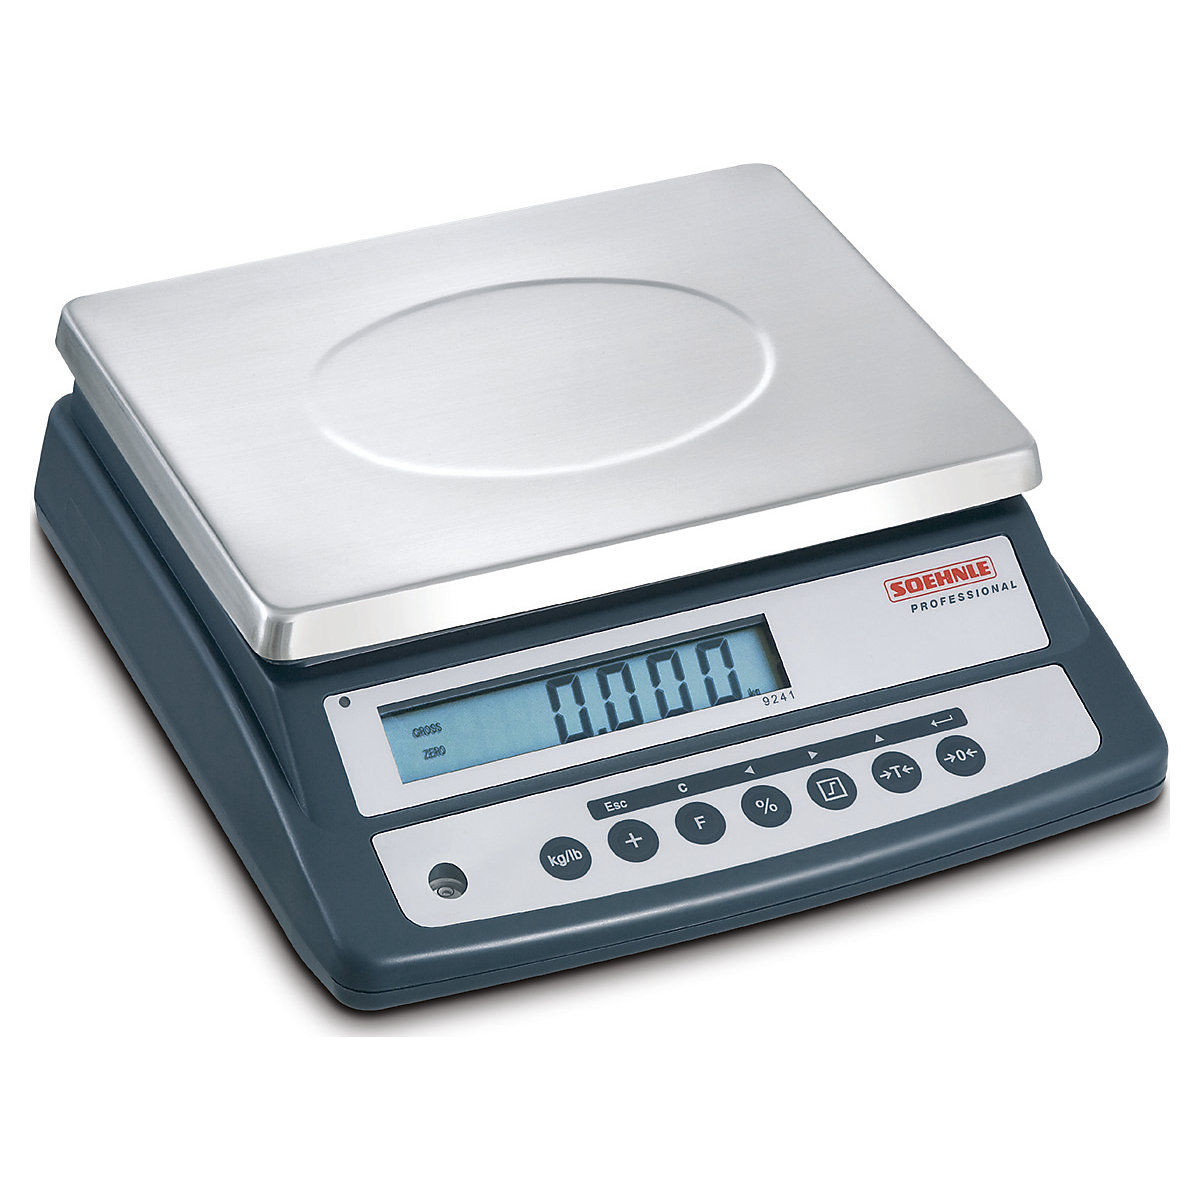 Compact/counting scales - Soehnle